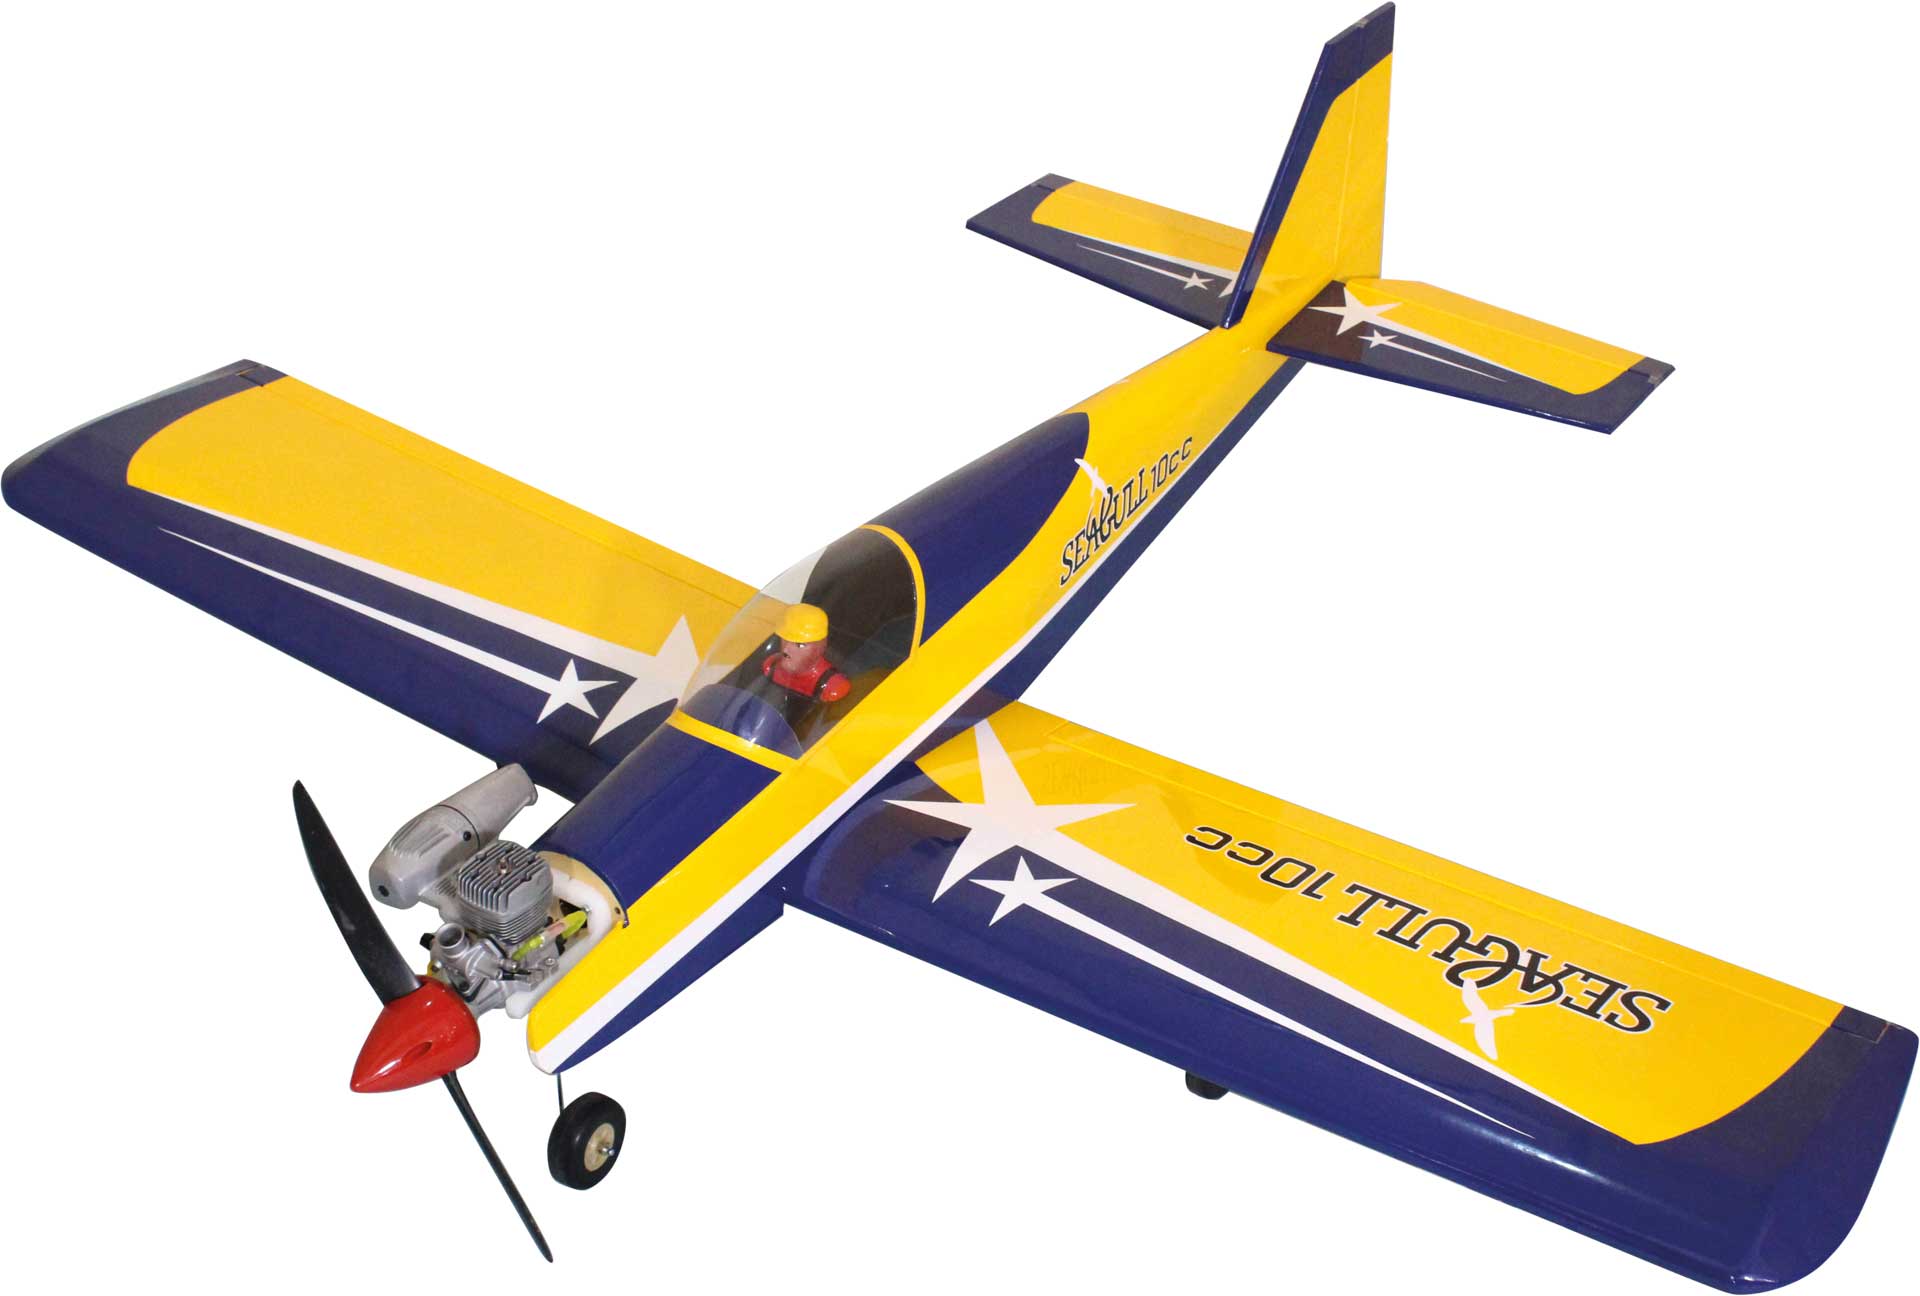 Seagull Models ( SG-Models ) Trainer 40 LW (low wing) ARF